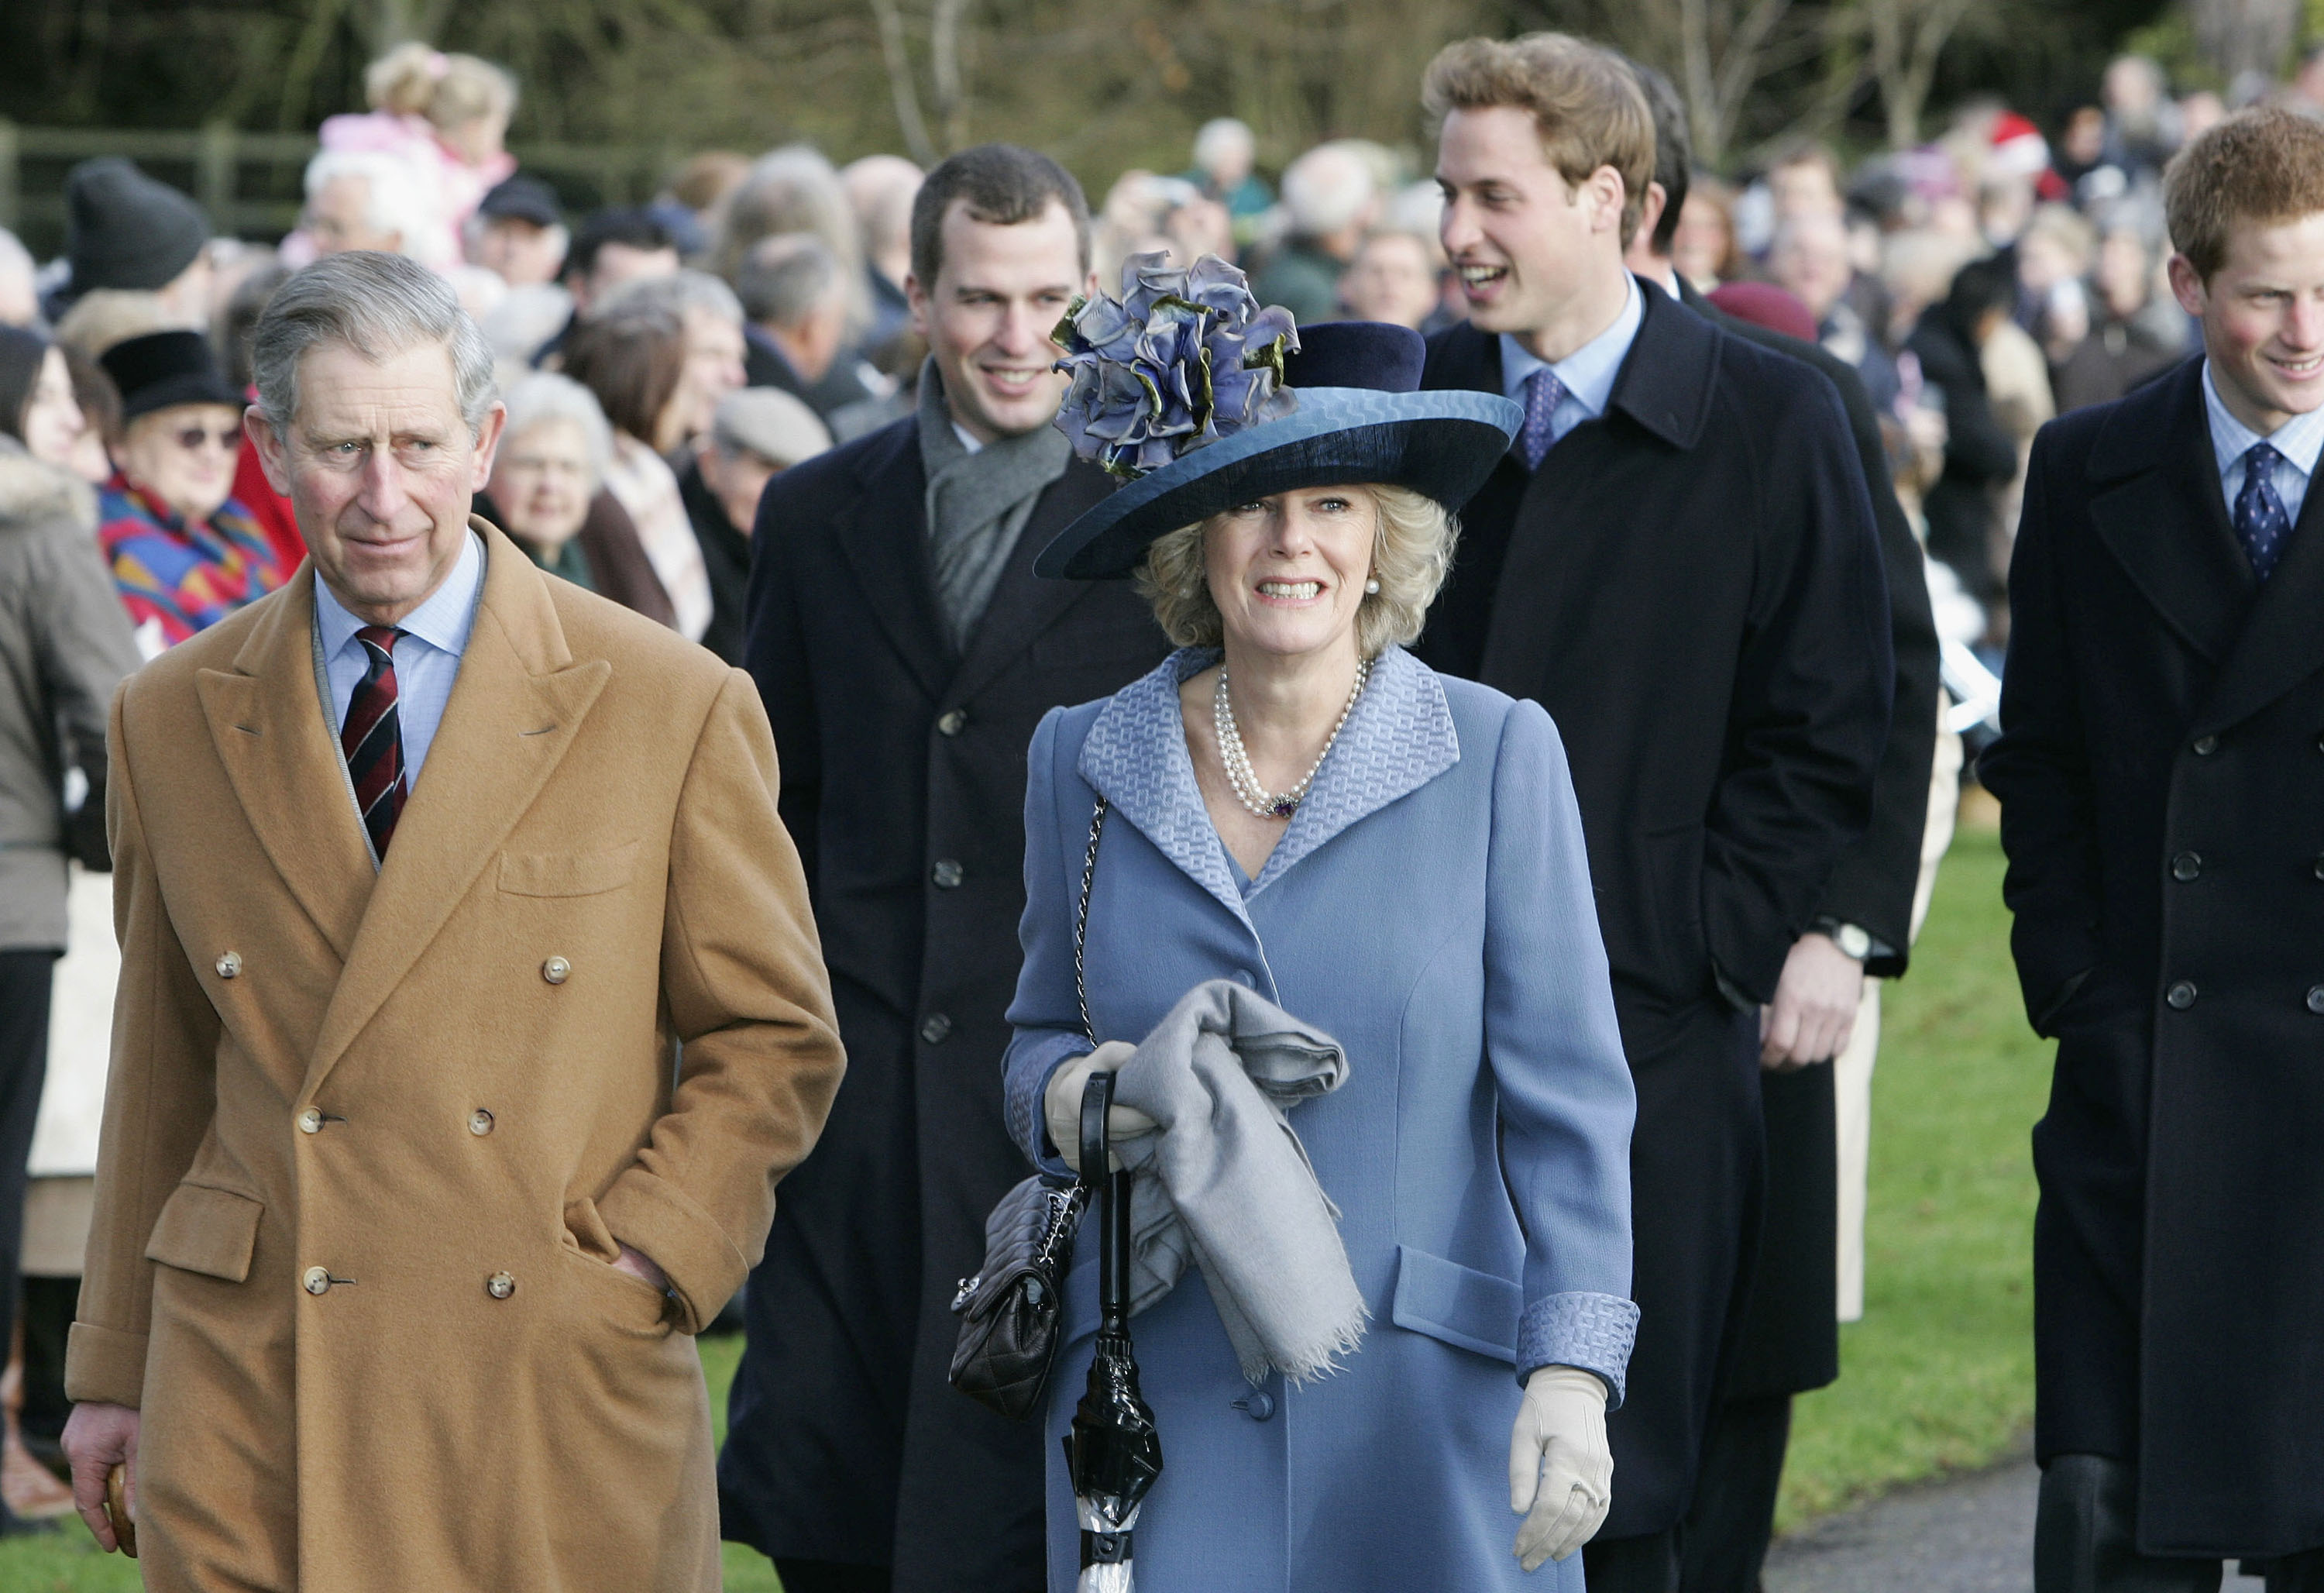 Best photos of Prince Charles and Duchess Camilla over the years ...